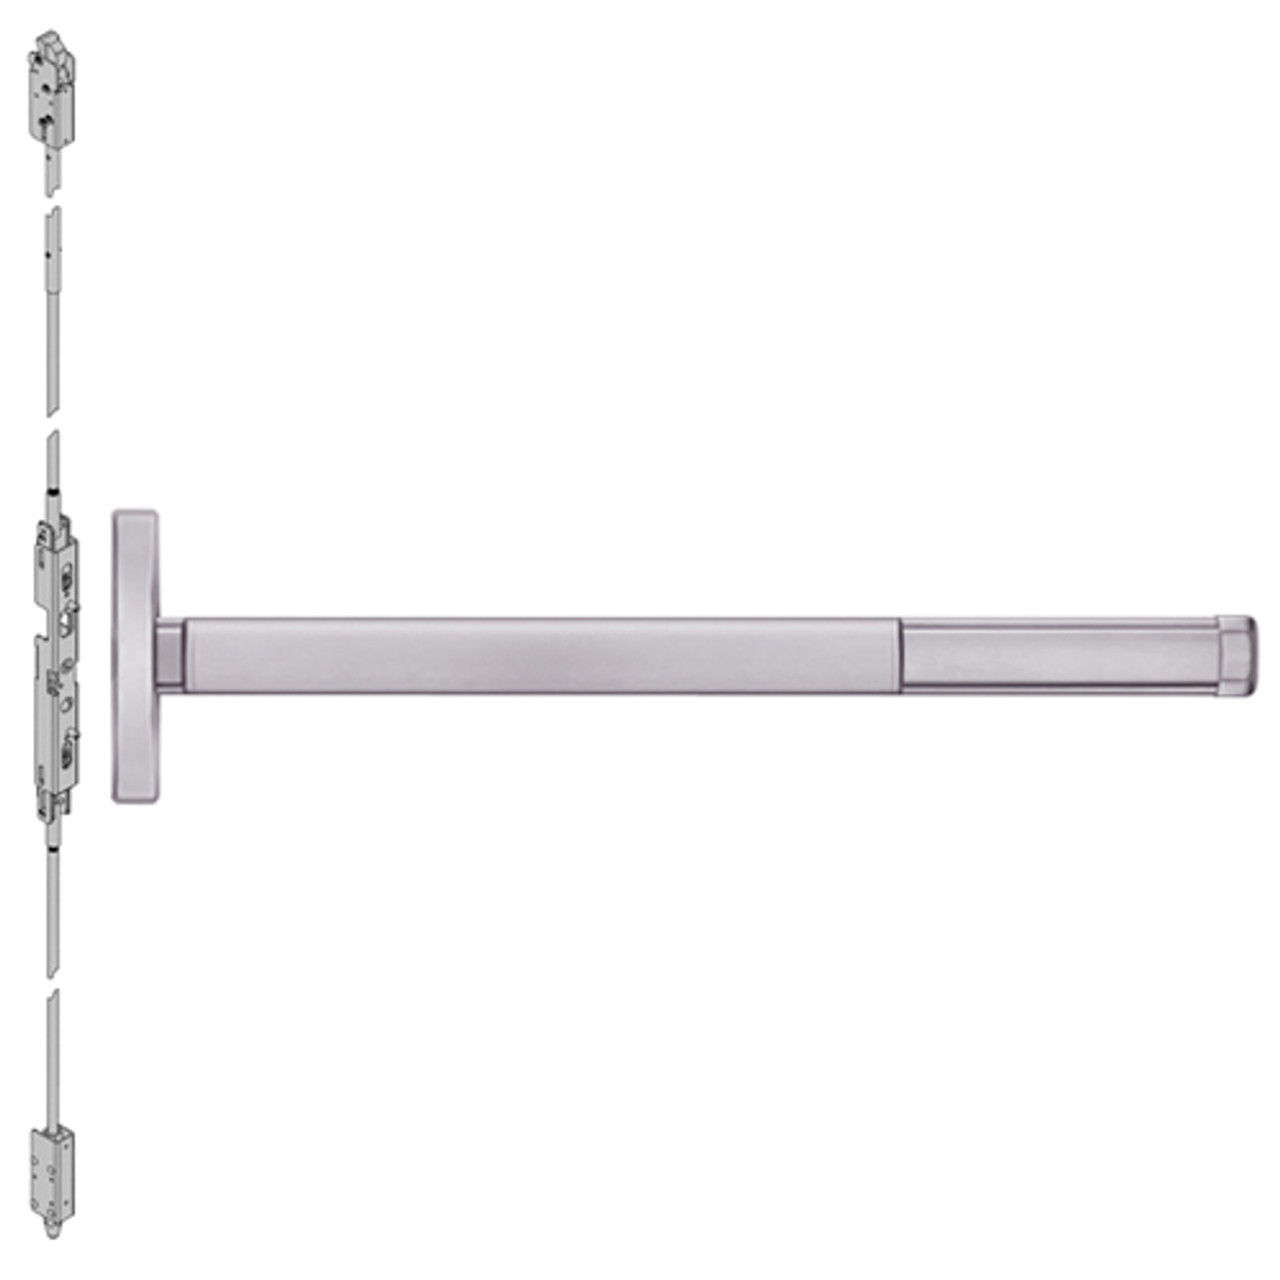 2603CD-630-48 PHI 2600 Series Non Fire Rated Concealed Vertical Rod Exit Device Prepped for Key Retracts Latchbolt with Cylinder Dogging in Satin Stainless Steel Finish